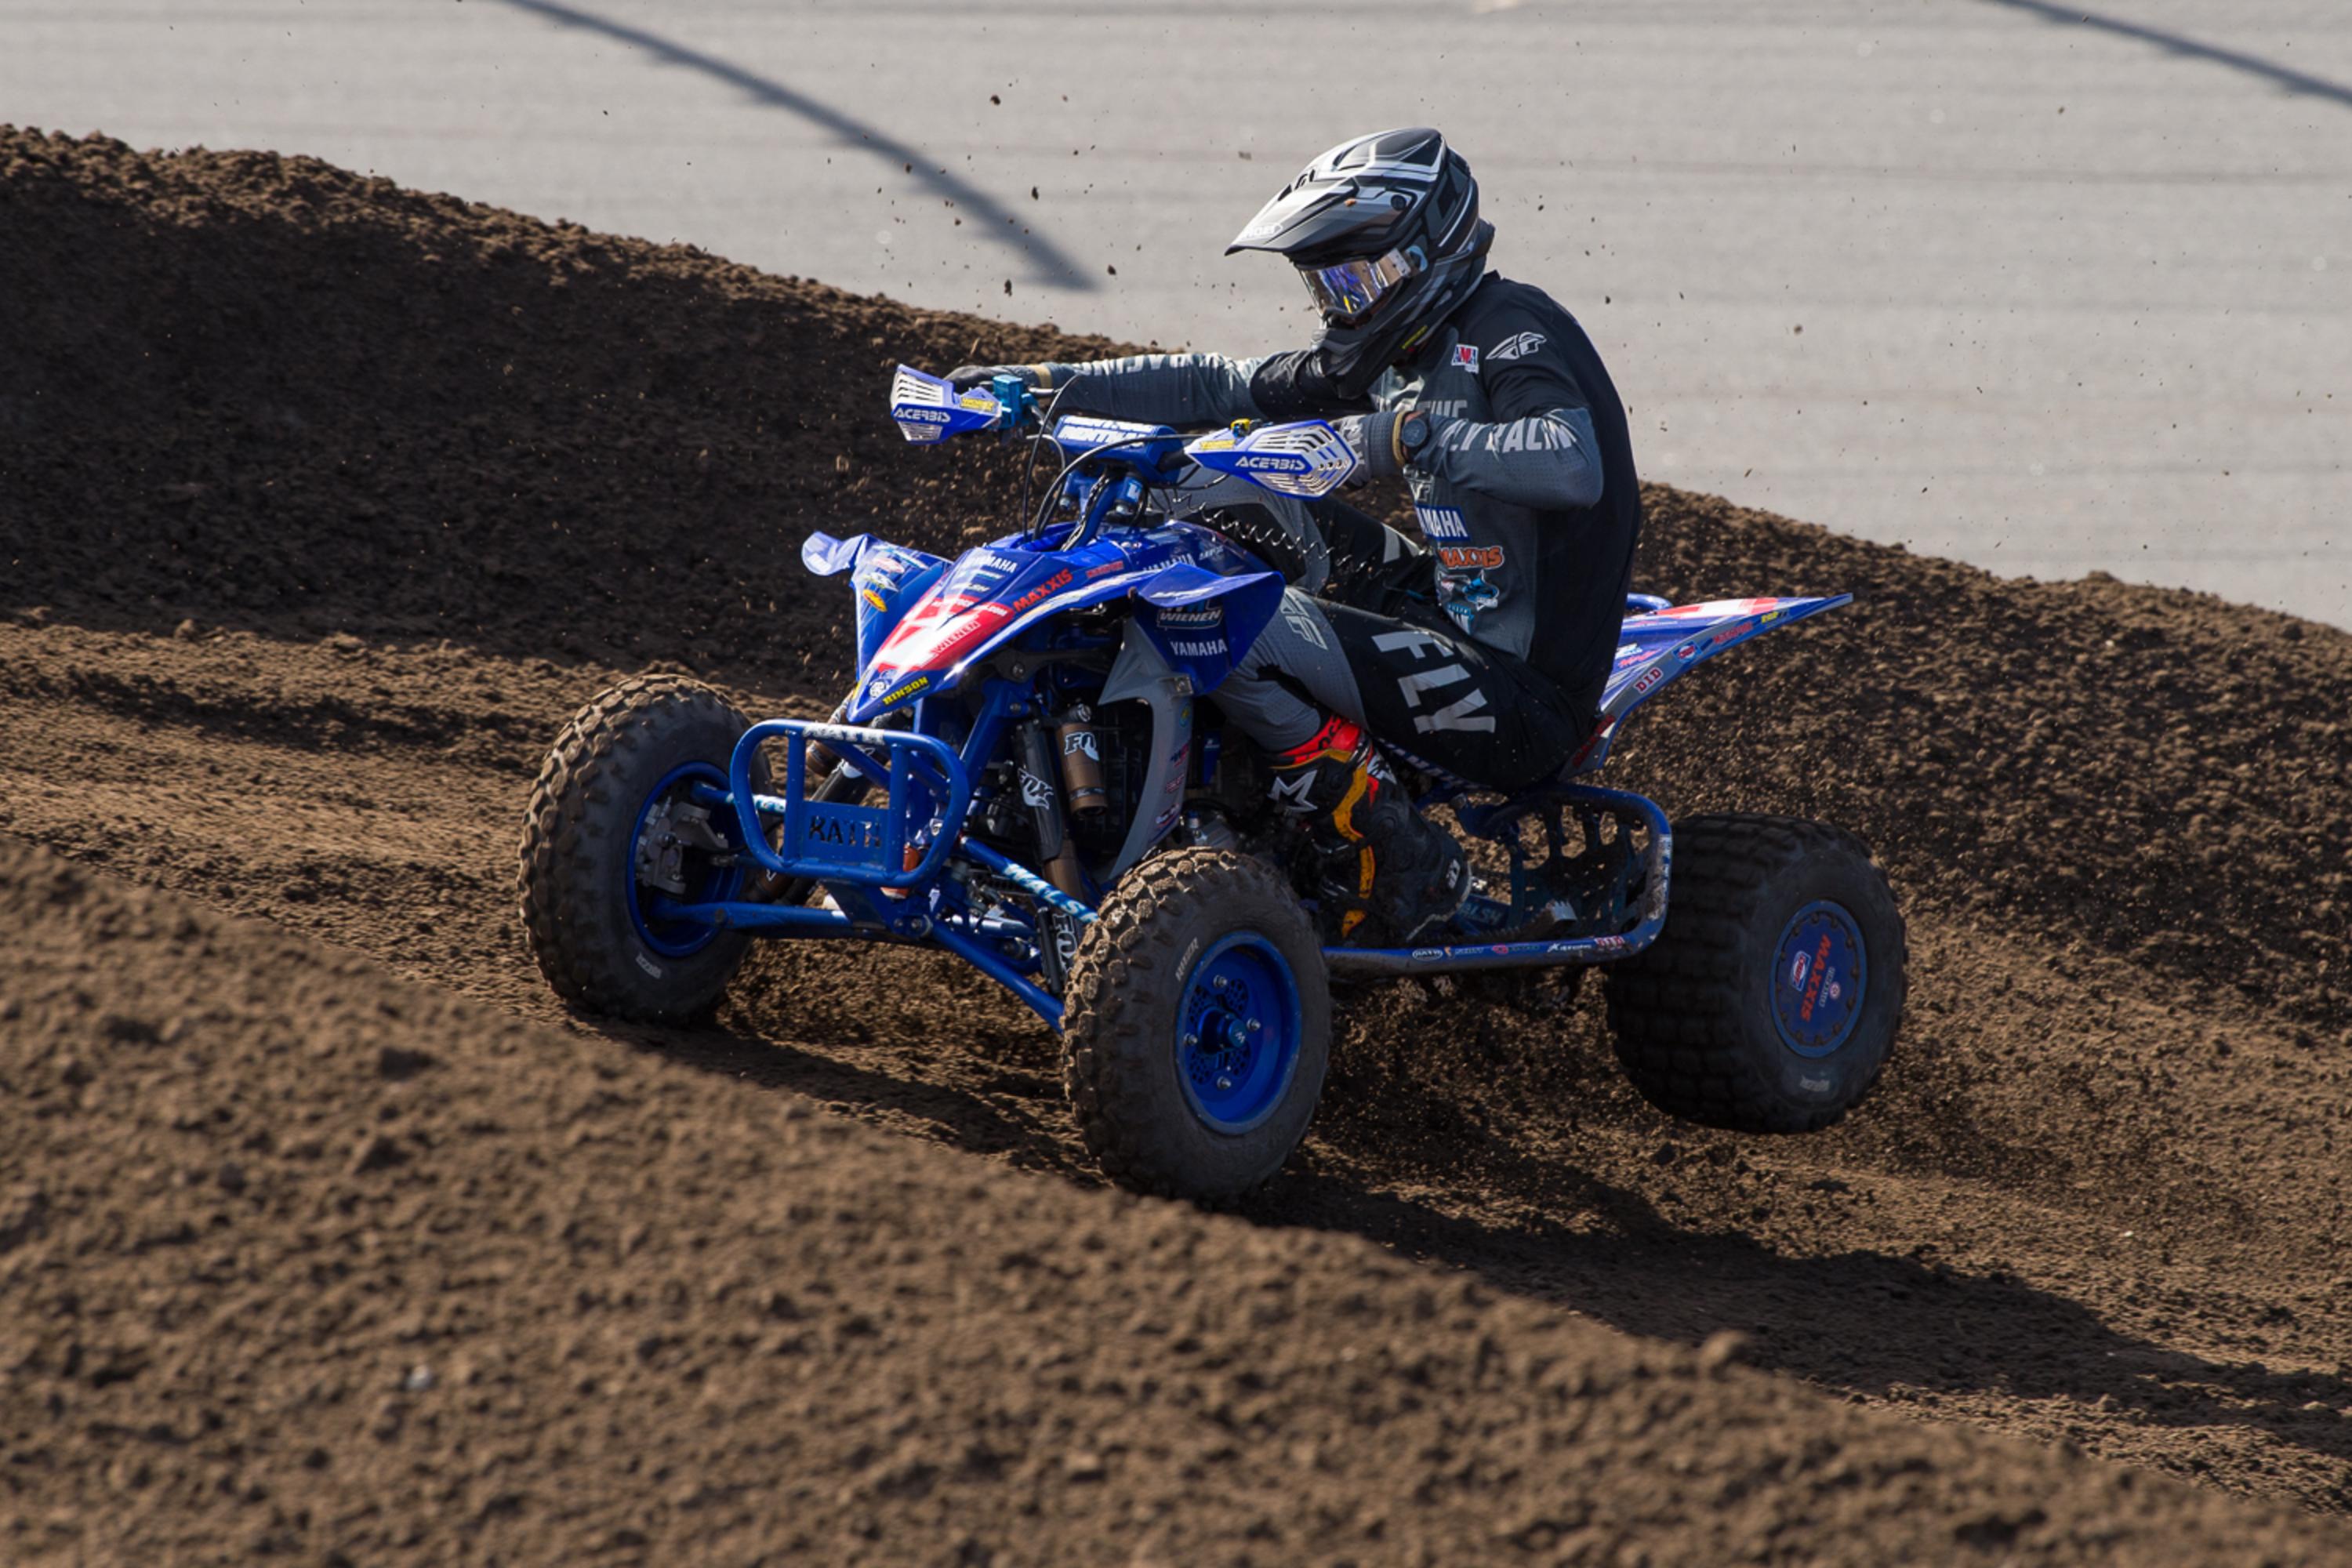 Atv Motocross Atv Motocross National Championship Presented By Cst Tires An Ama National Championship